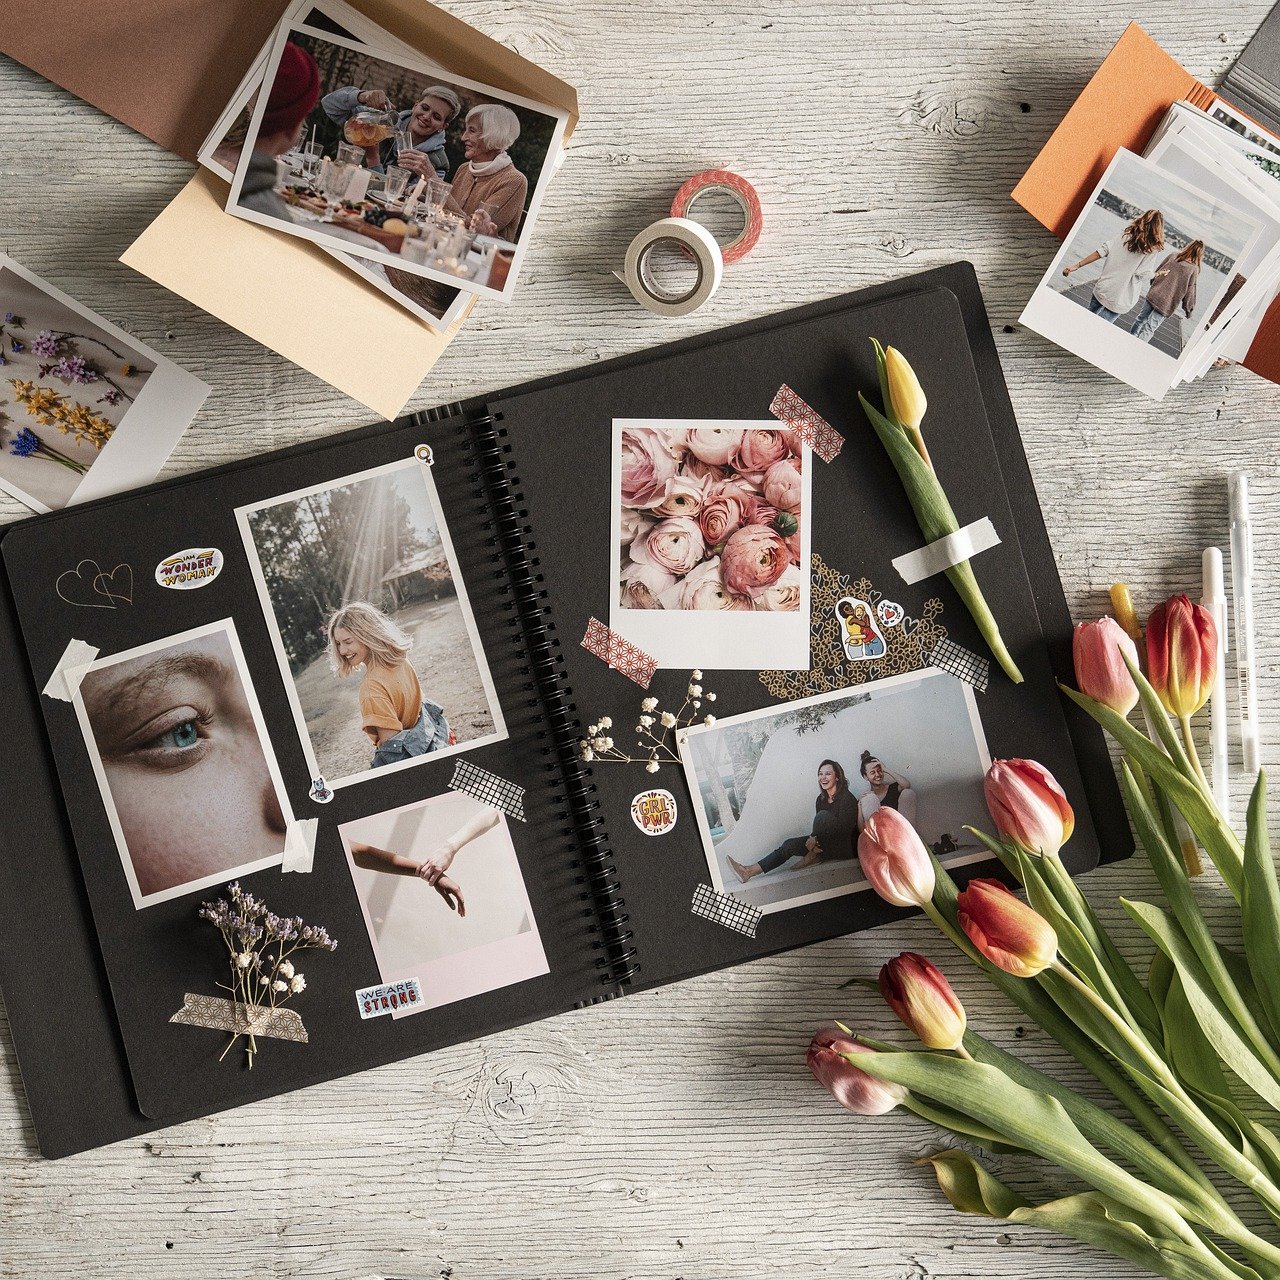 Printing Photos for Scrapbooking: Creative Ideas and Techniques